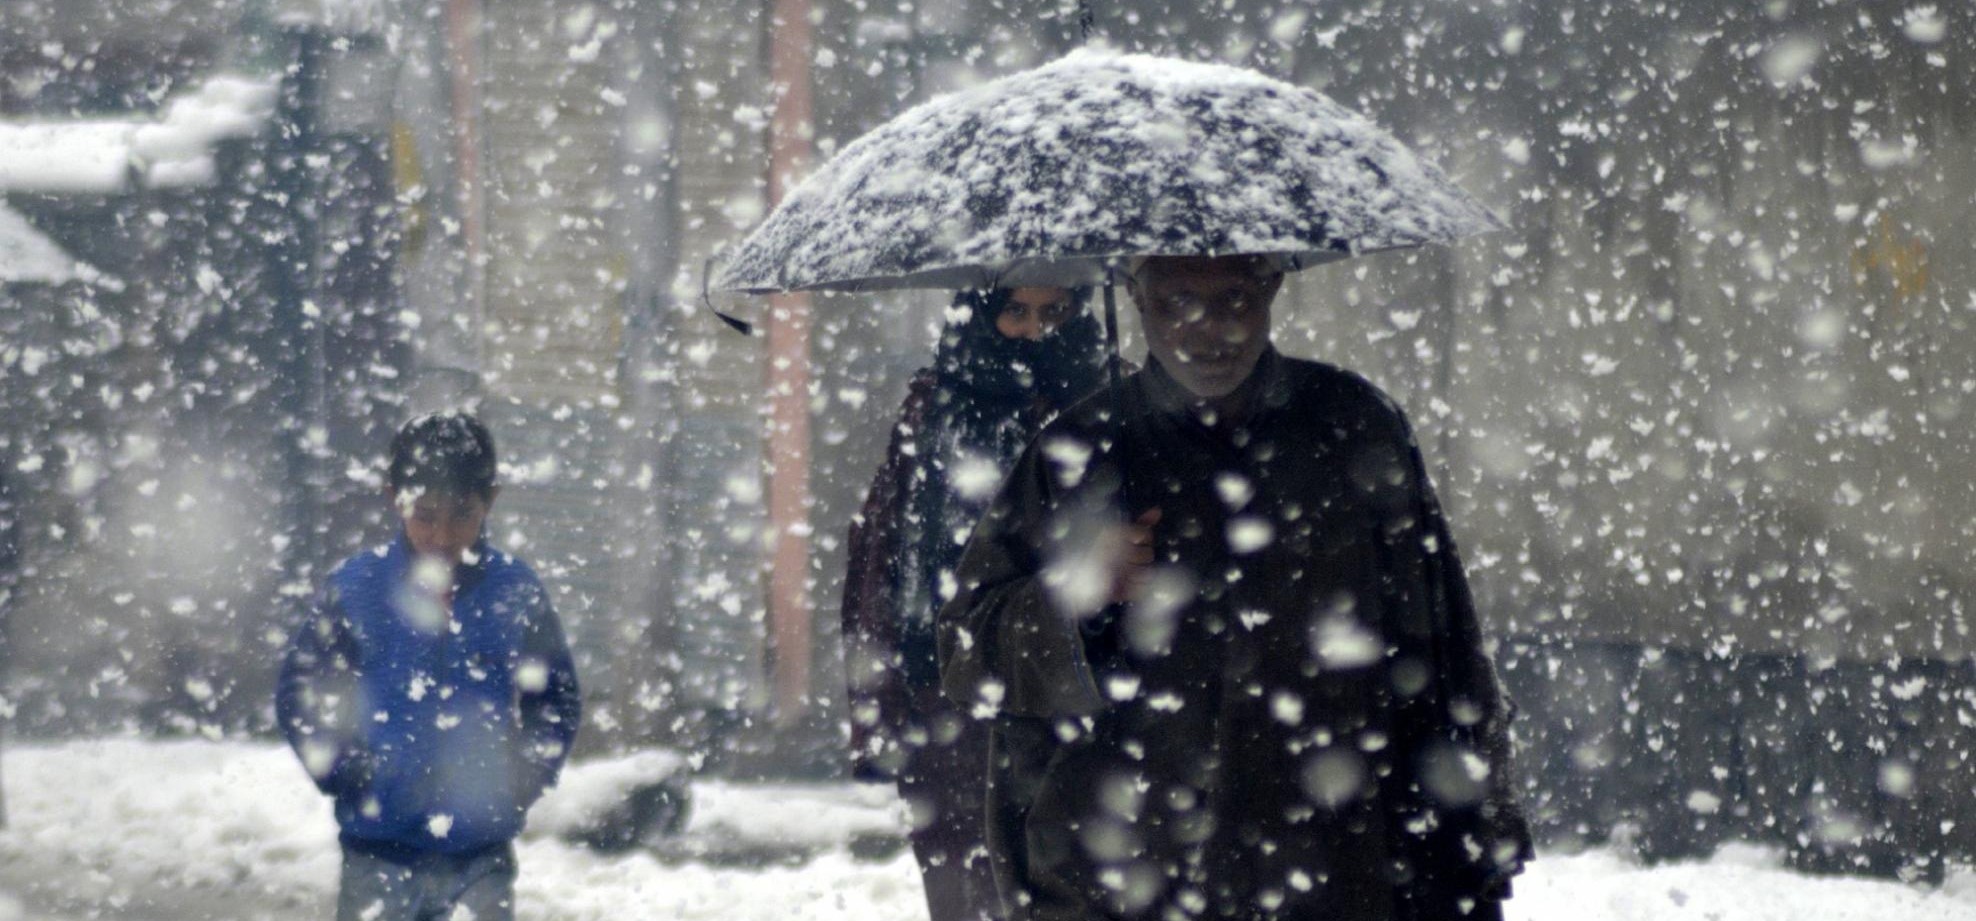 Mild snowfall in Lahaul and Spiti, rain lashes several parts of Himachal